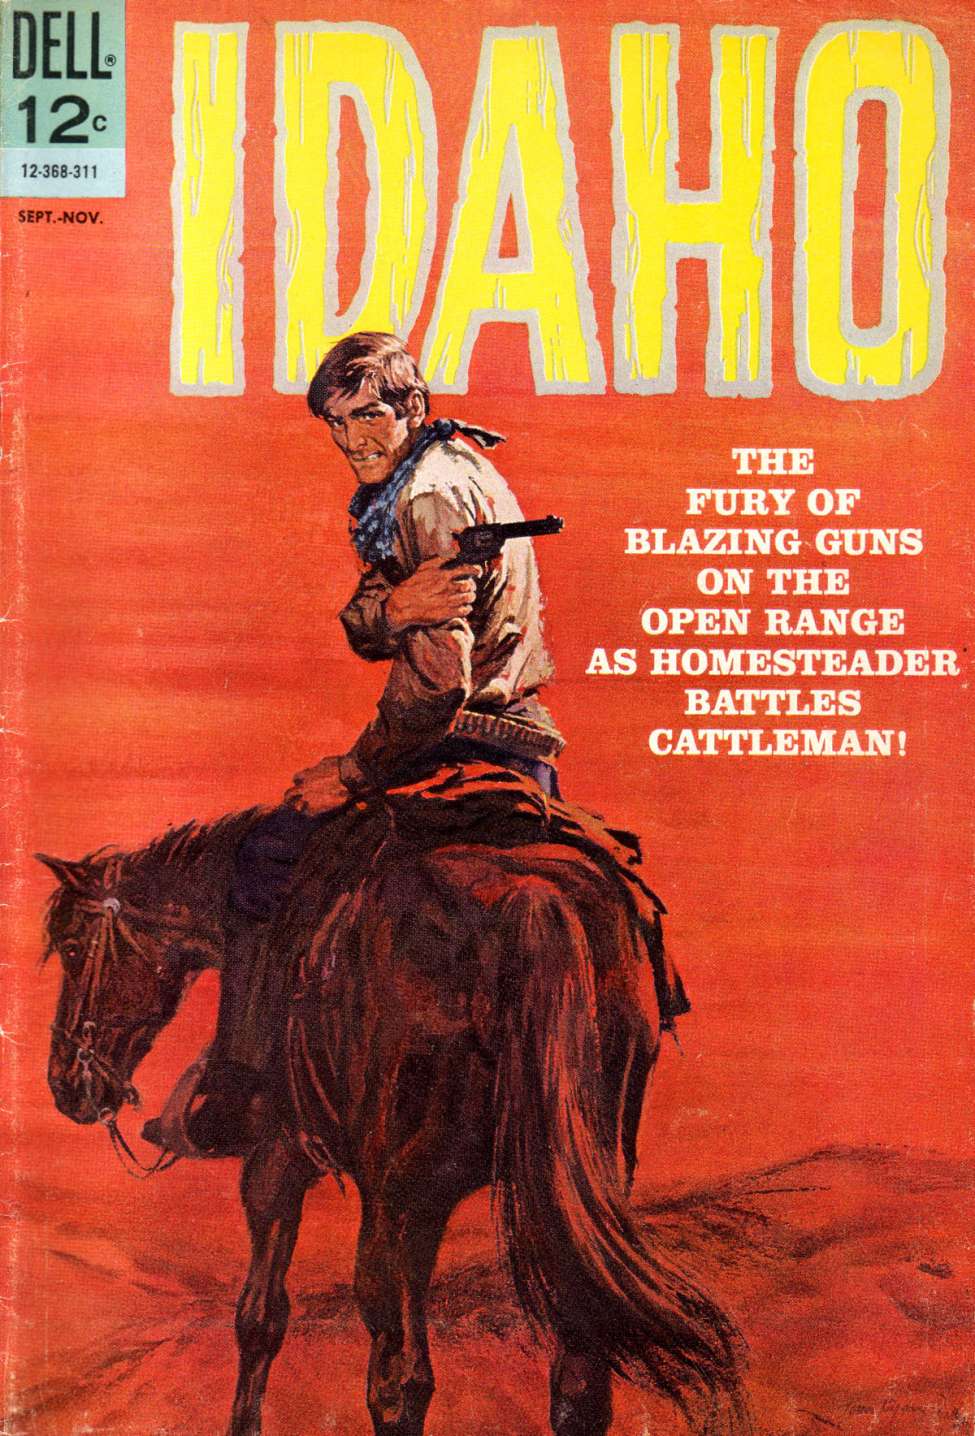 Book Cover For Idaho 2